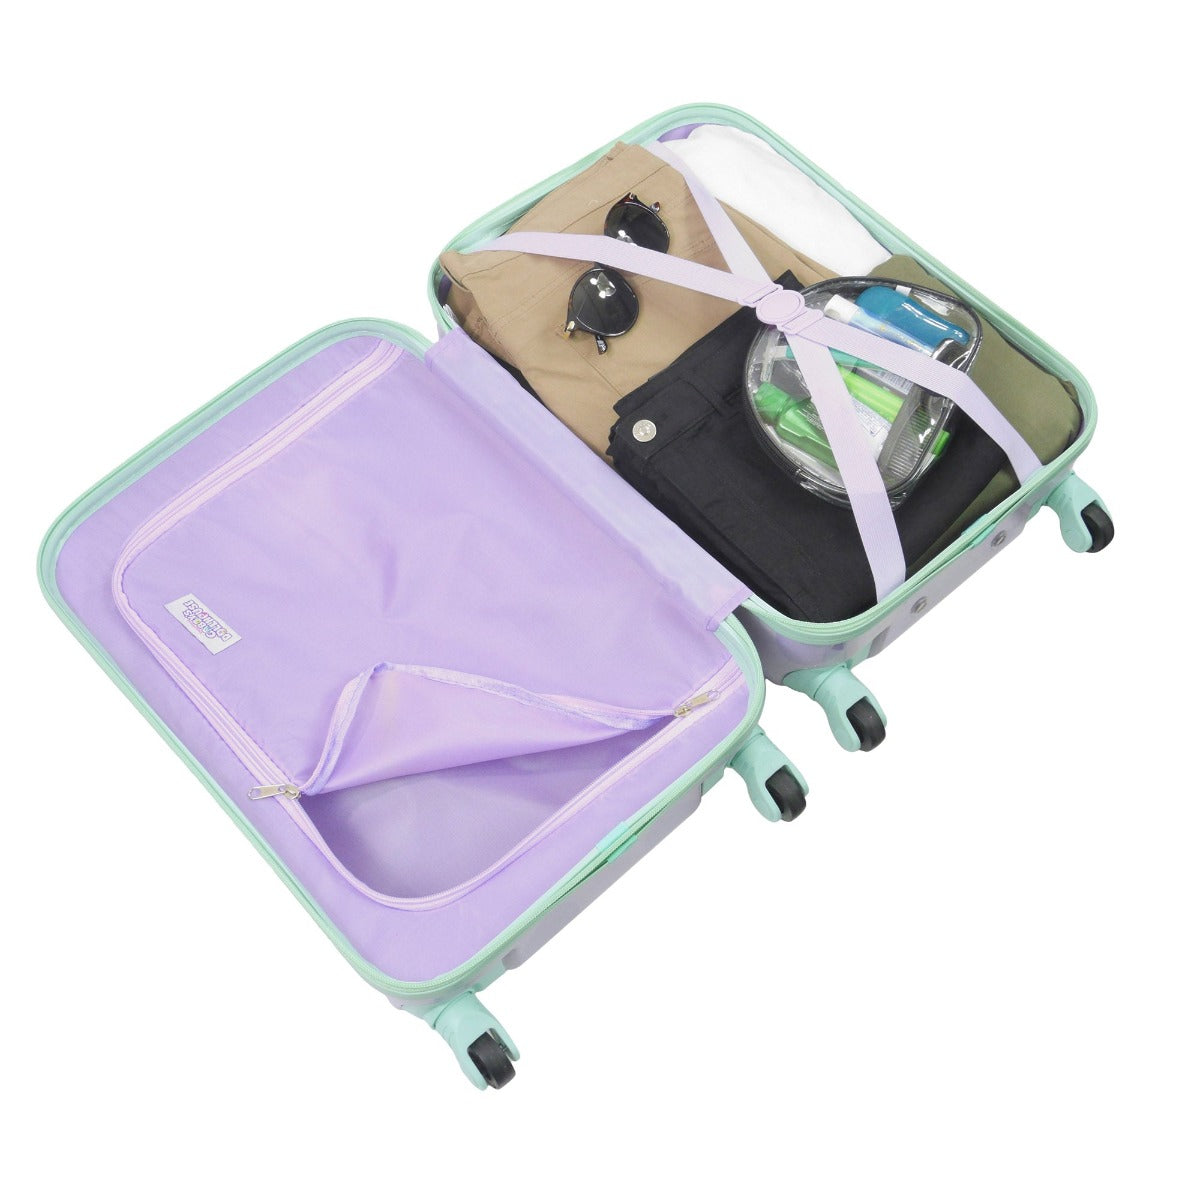 Gabby's Dollhouse 21" hardside spinner luggage - best kids carry on suitcase for travelling